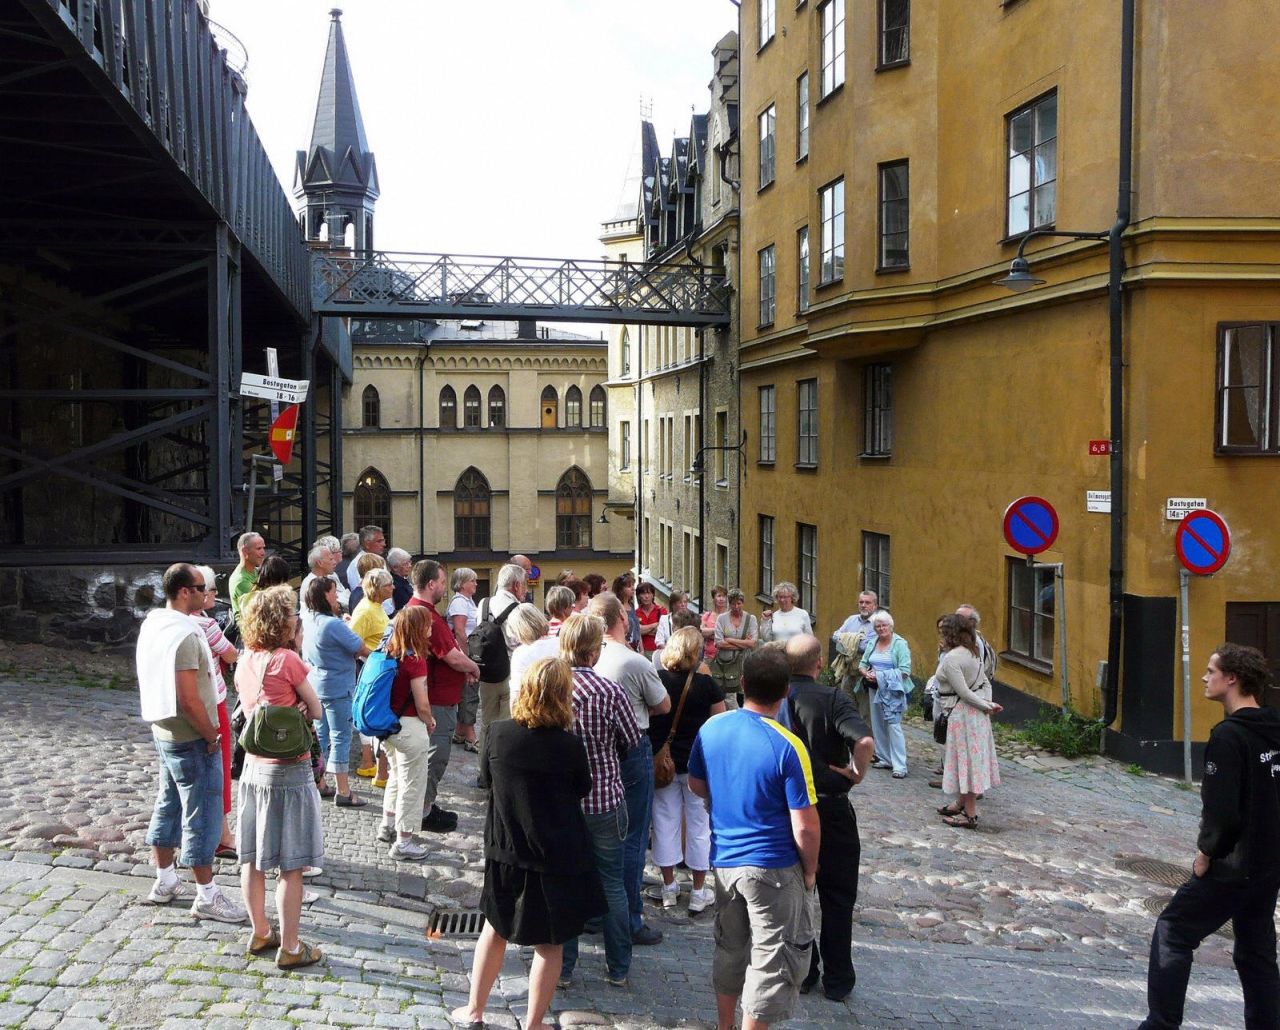 Fans of the Millenium trilogy by Swedish author Stieg Larsson gather at Bellmansgatan 1, the supposed address of Mikael Blomkvist, the hero of the saga, in a guided tour of Stockholm.